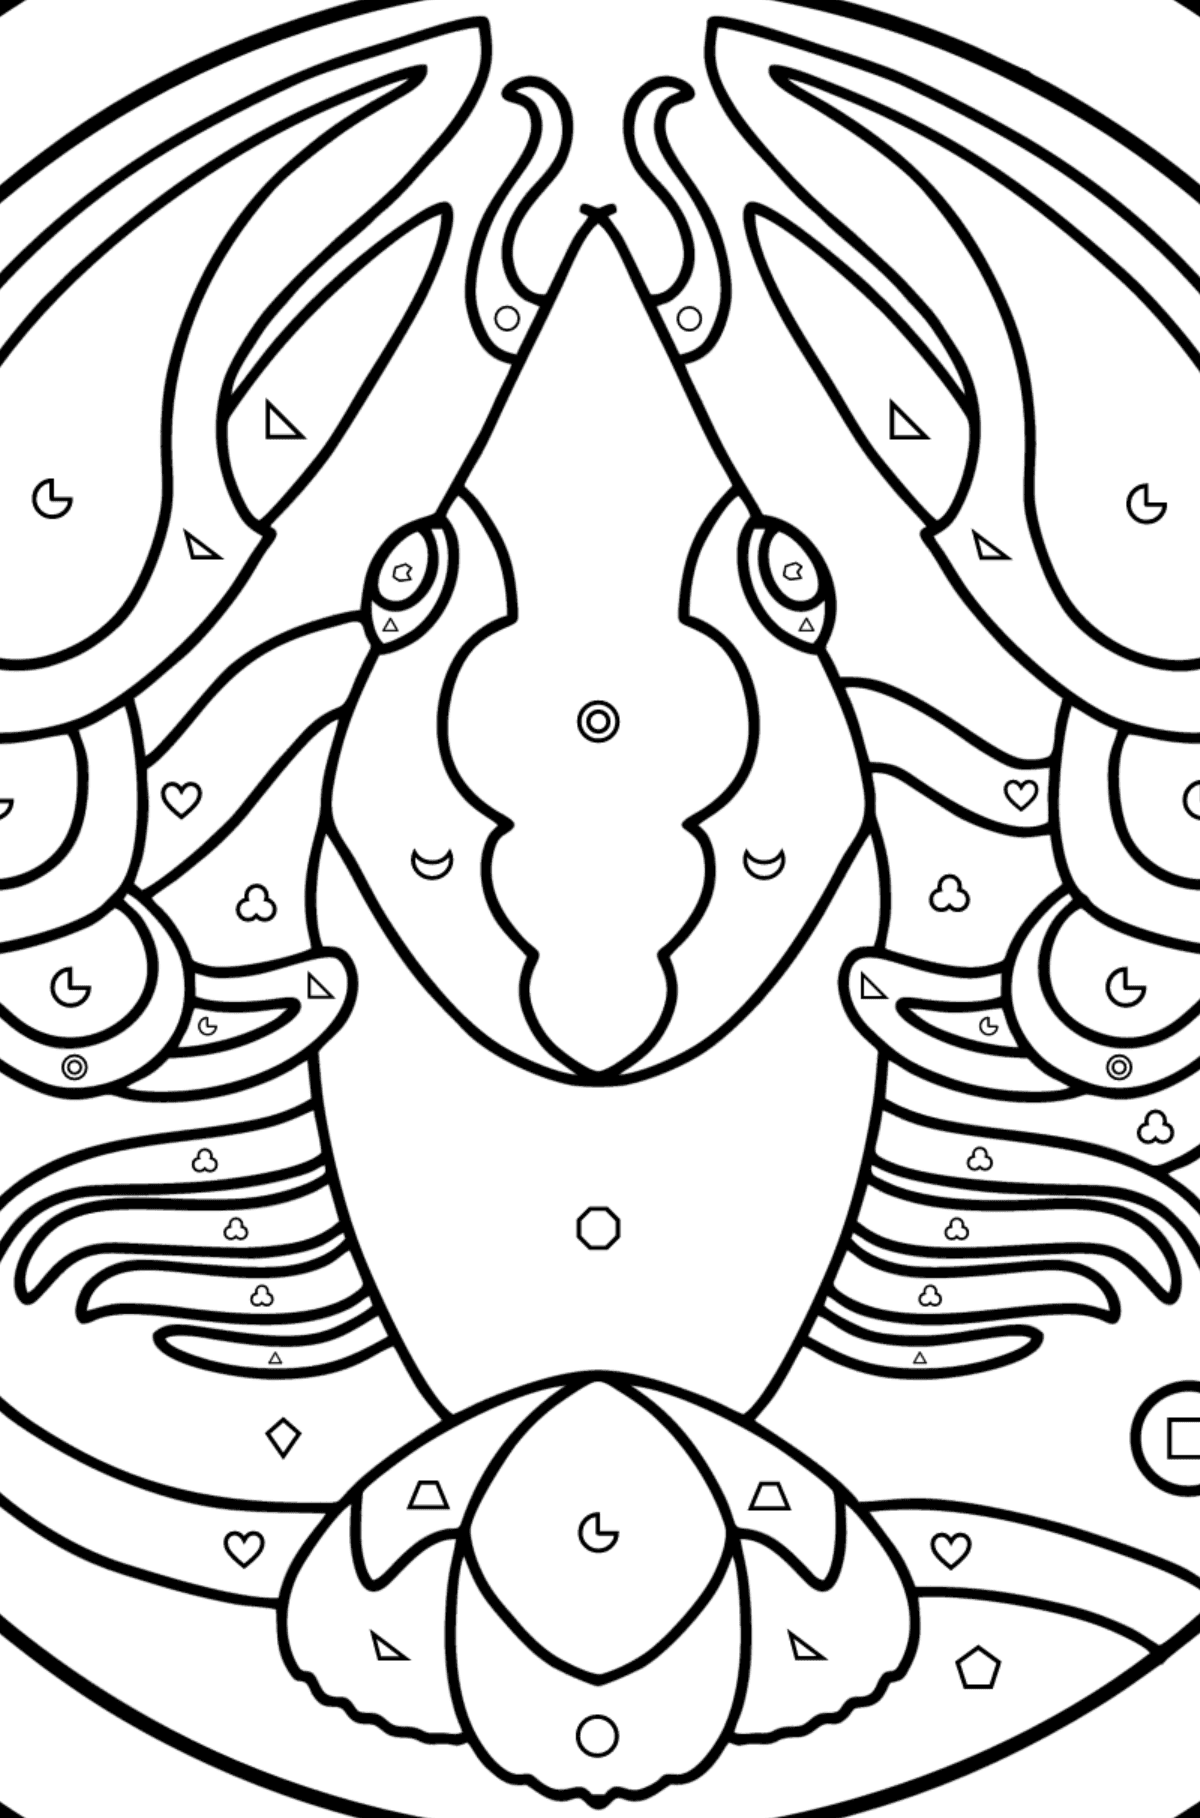 Coloring page for kids - Cancer zodiac sign - Coloring by Geometric Shapes for Kids